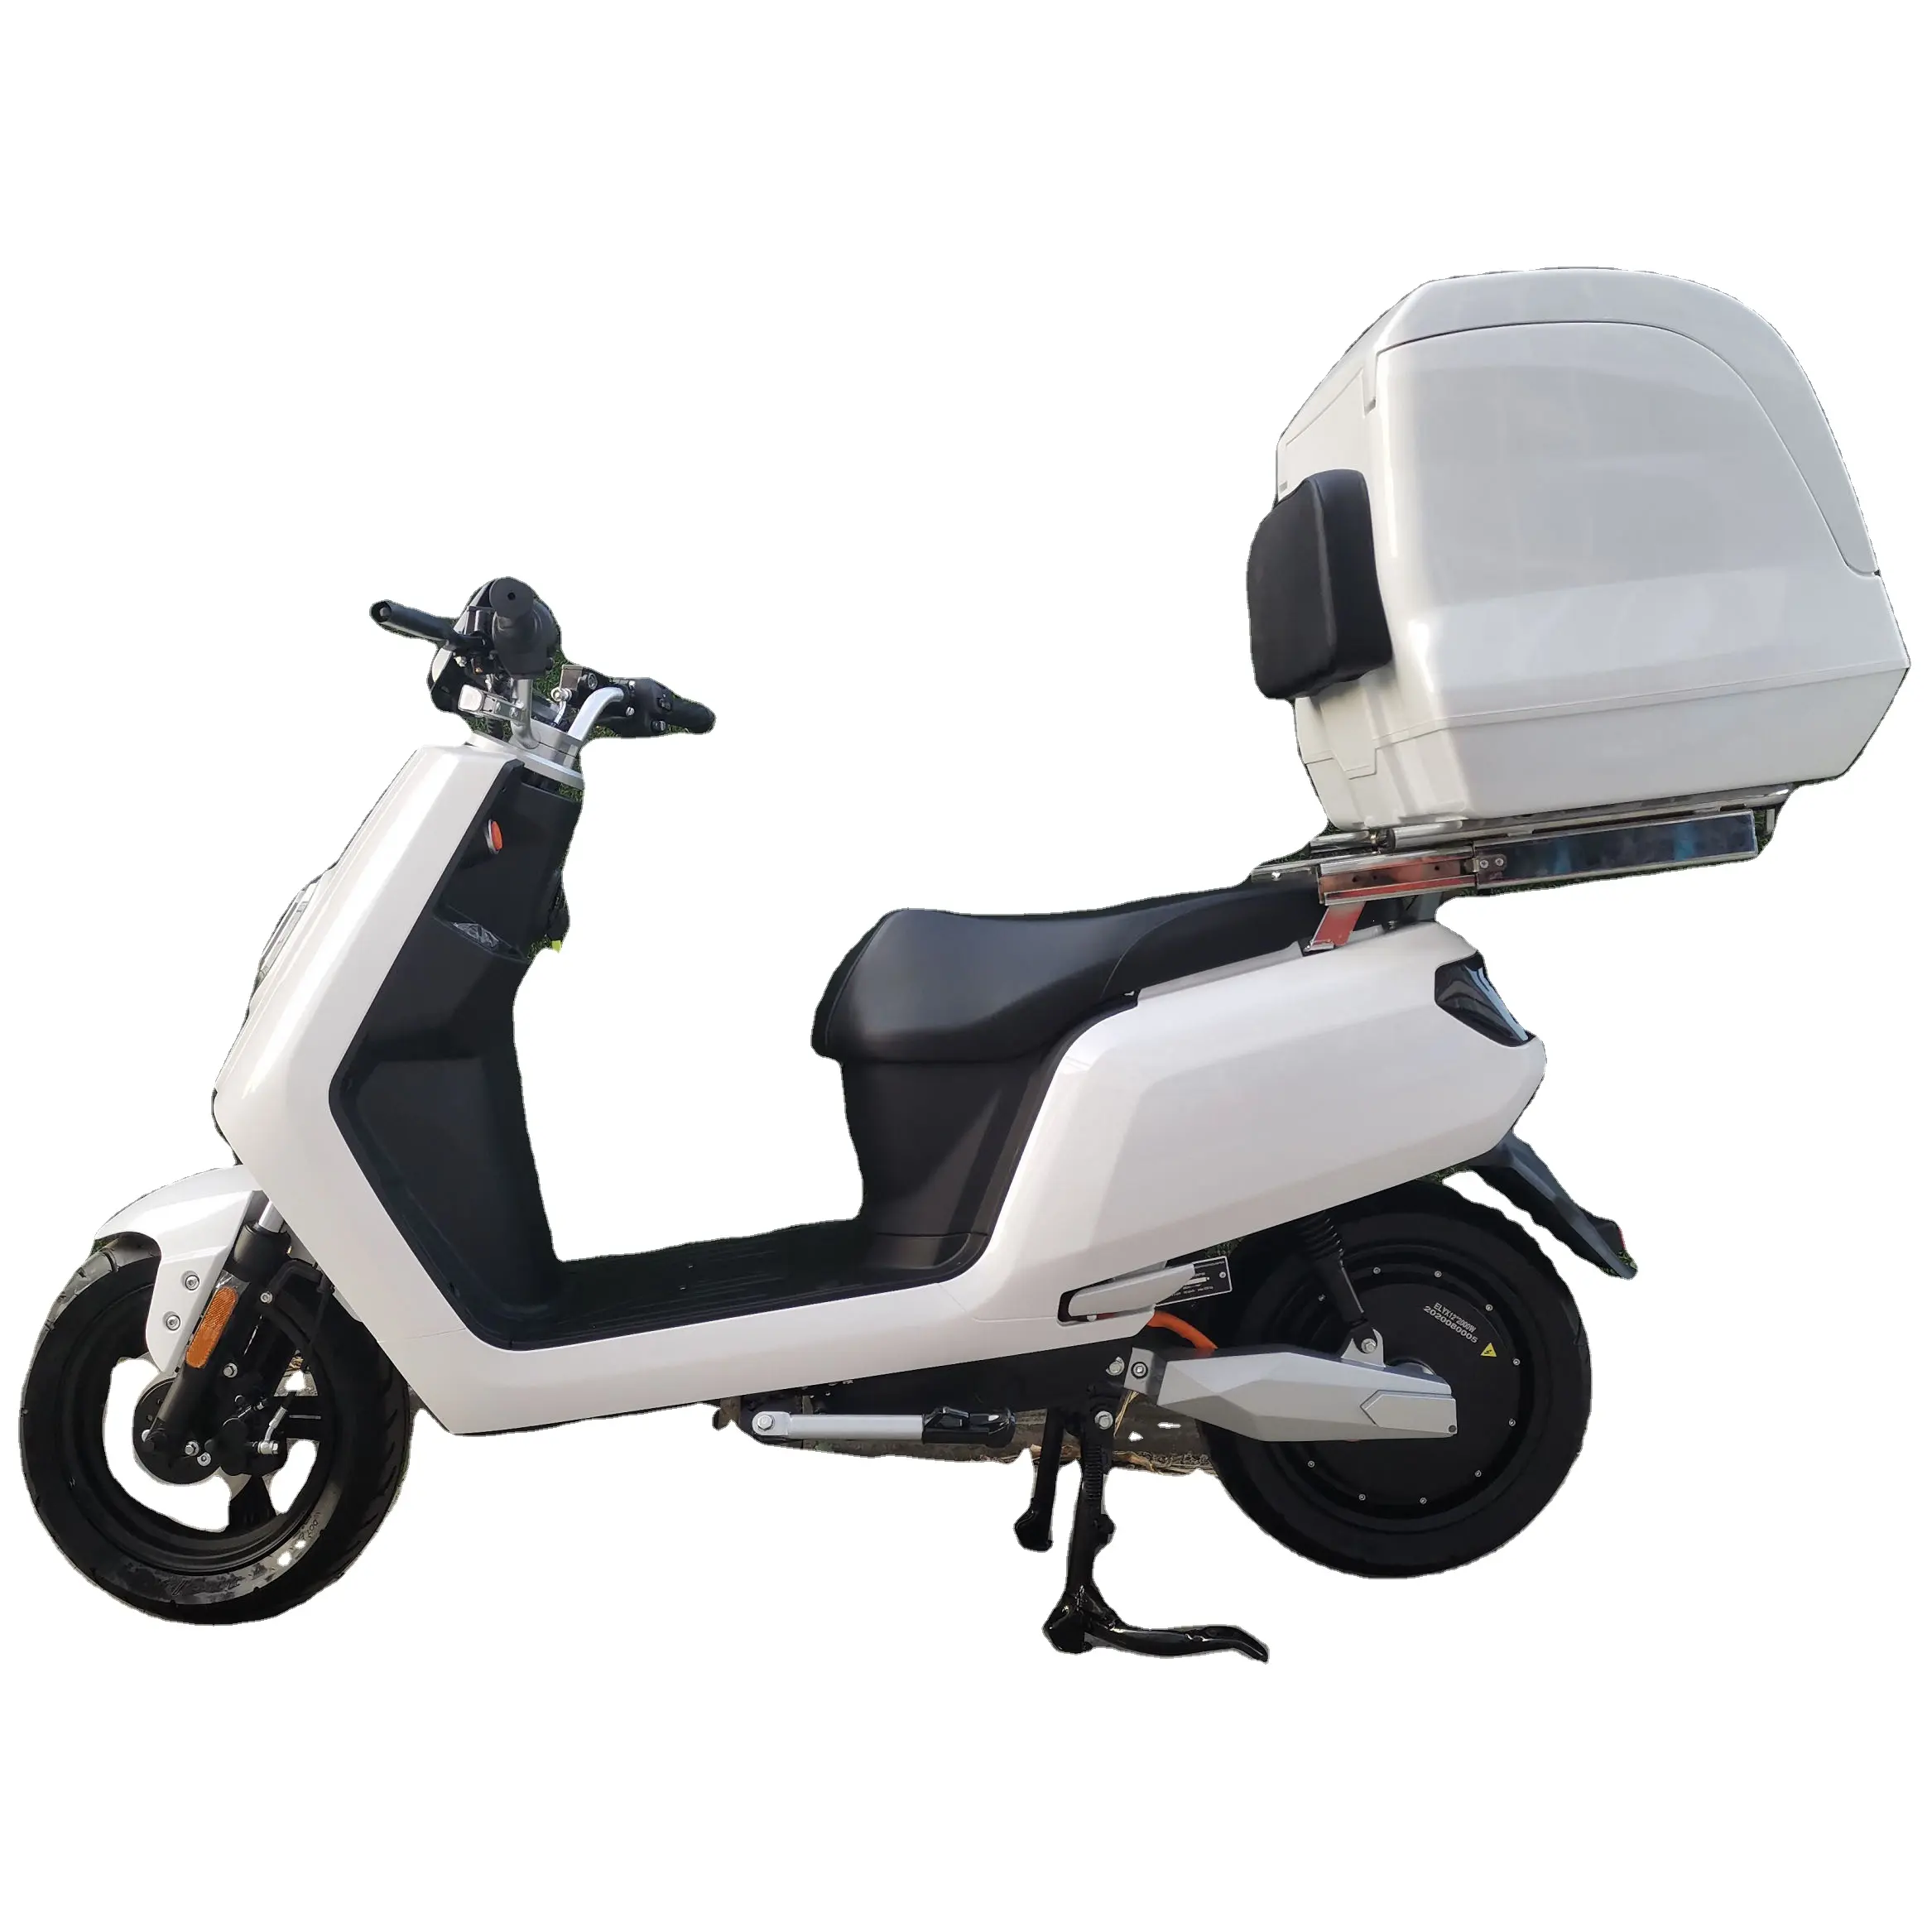 DAZZ OEM Factory Wholesale Price Pizz Box Delivery Scooter Electric Moto Electrica Heavy Duty Delivery Adults 2000W Cargo Scoot